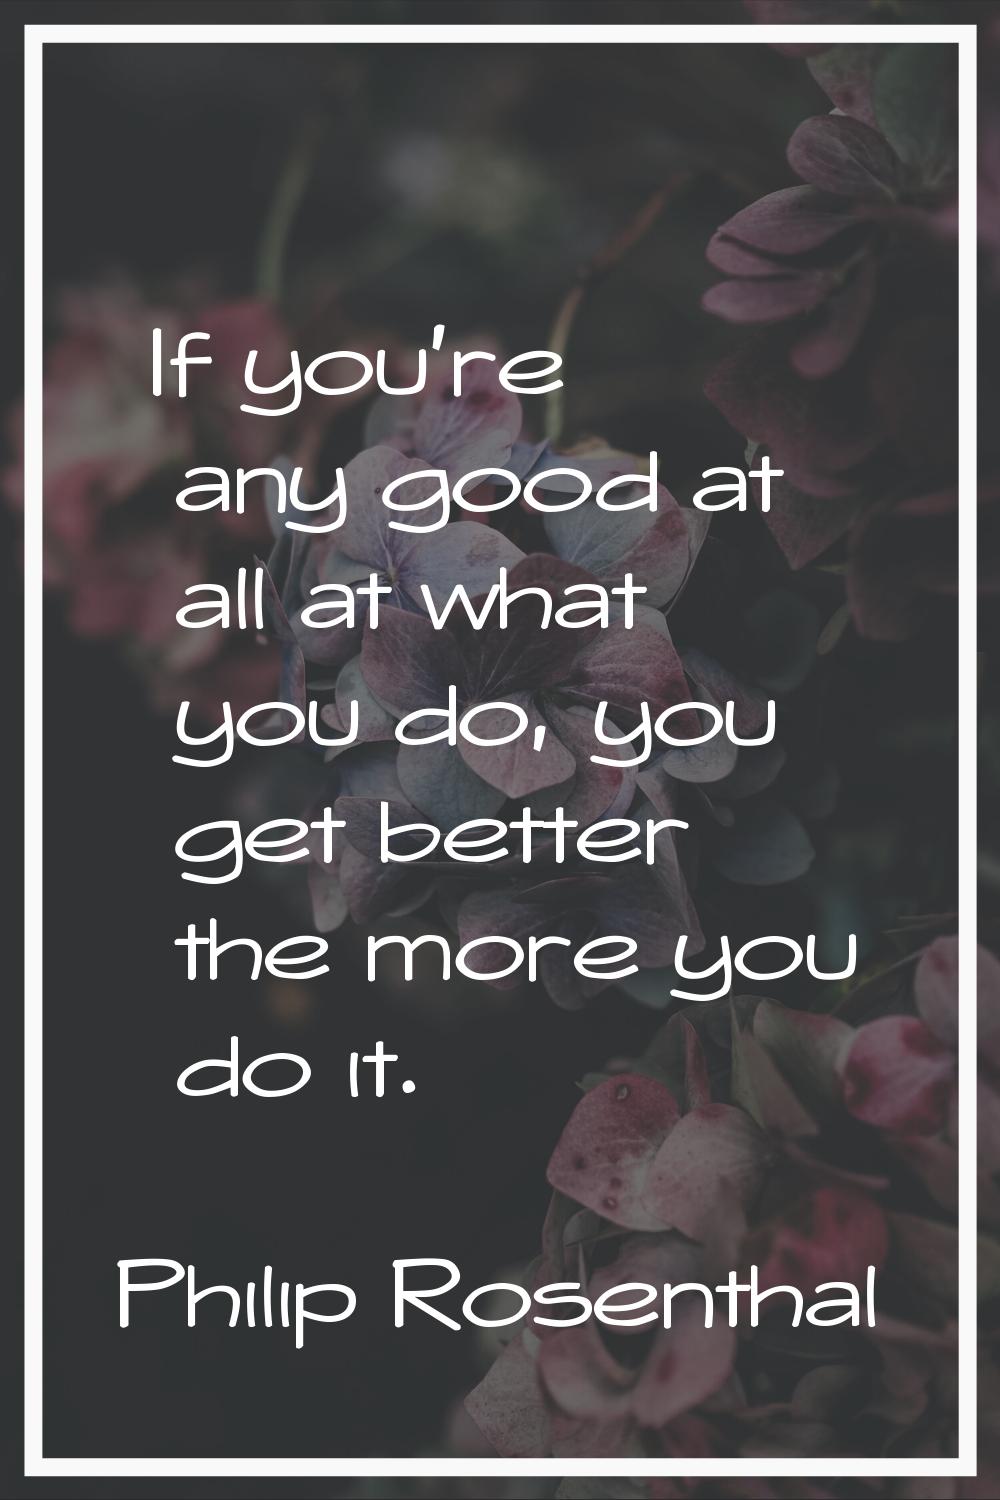 If you're any good at all at what you do, you get better the more you do it.